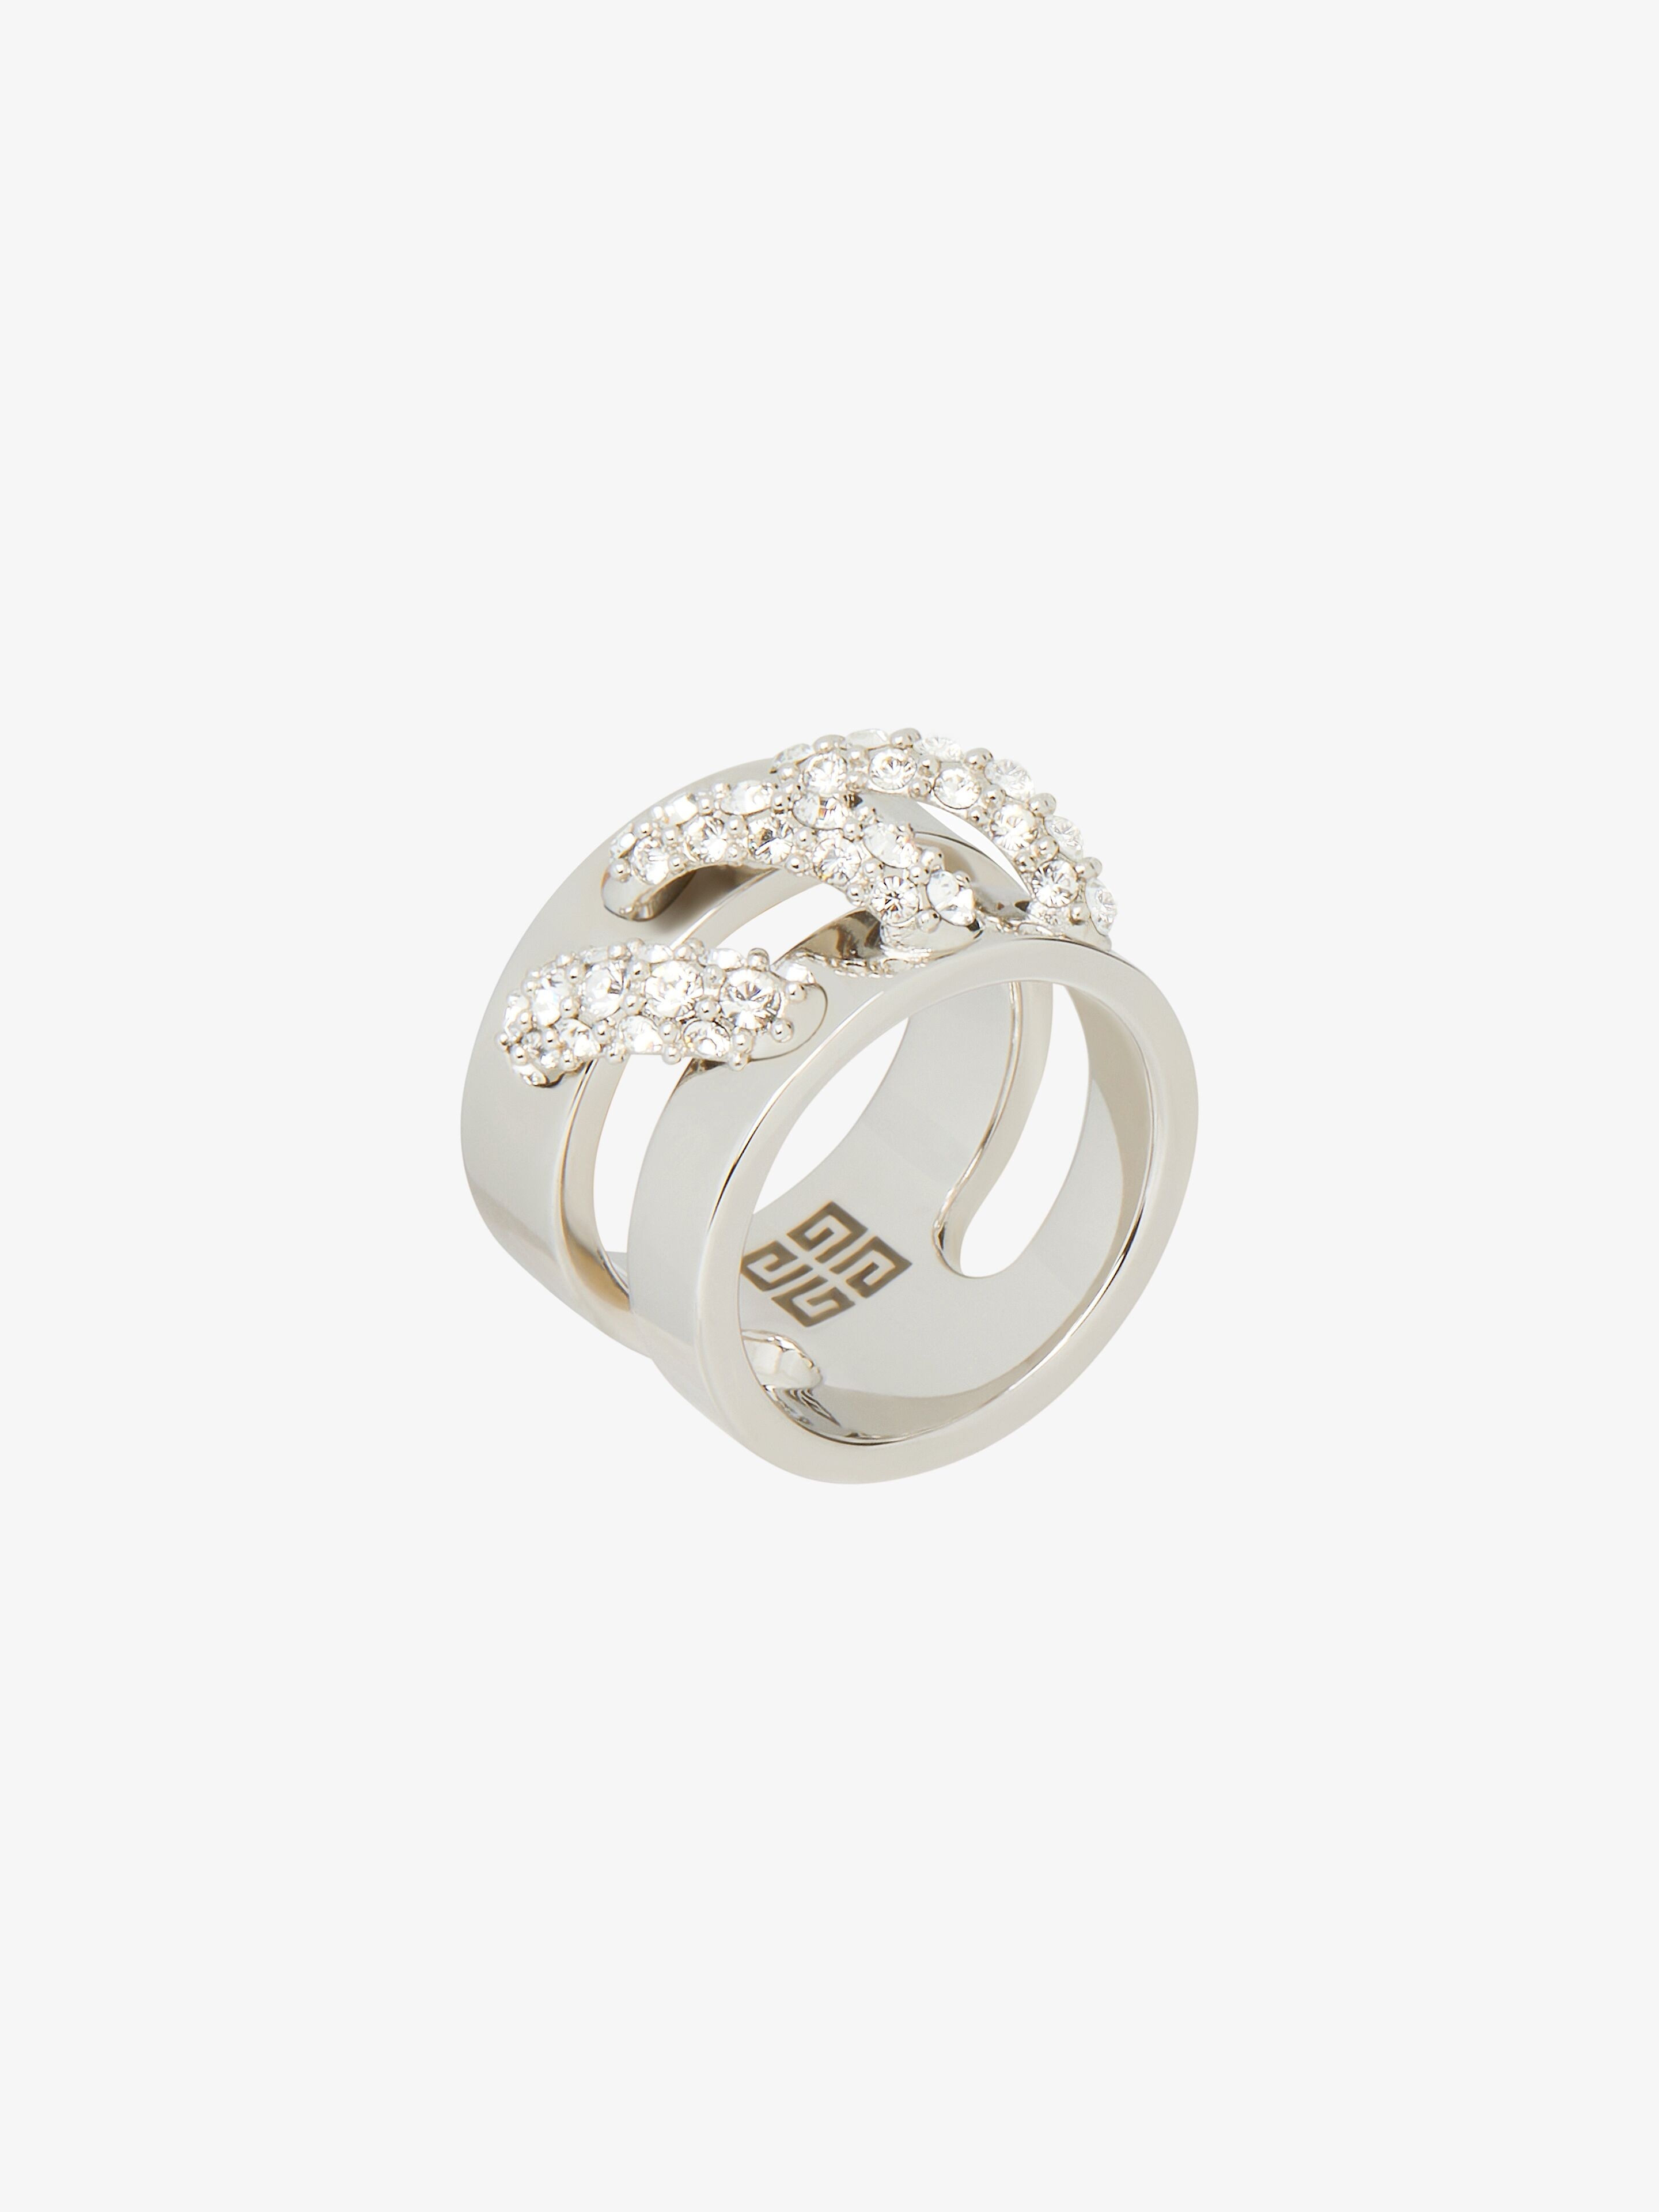 Givenchy Women's Stitch Ring in Metal with Crystals - Silvery - Size 5.25